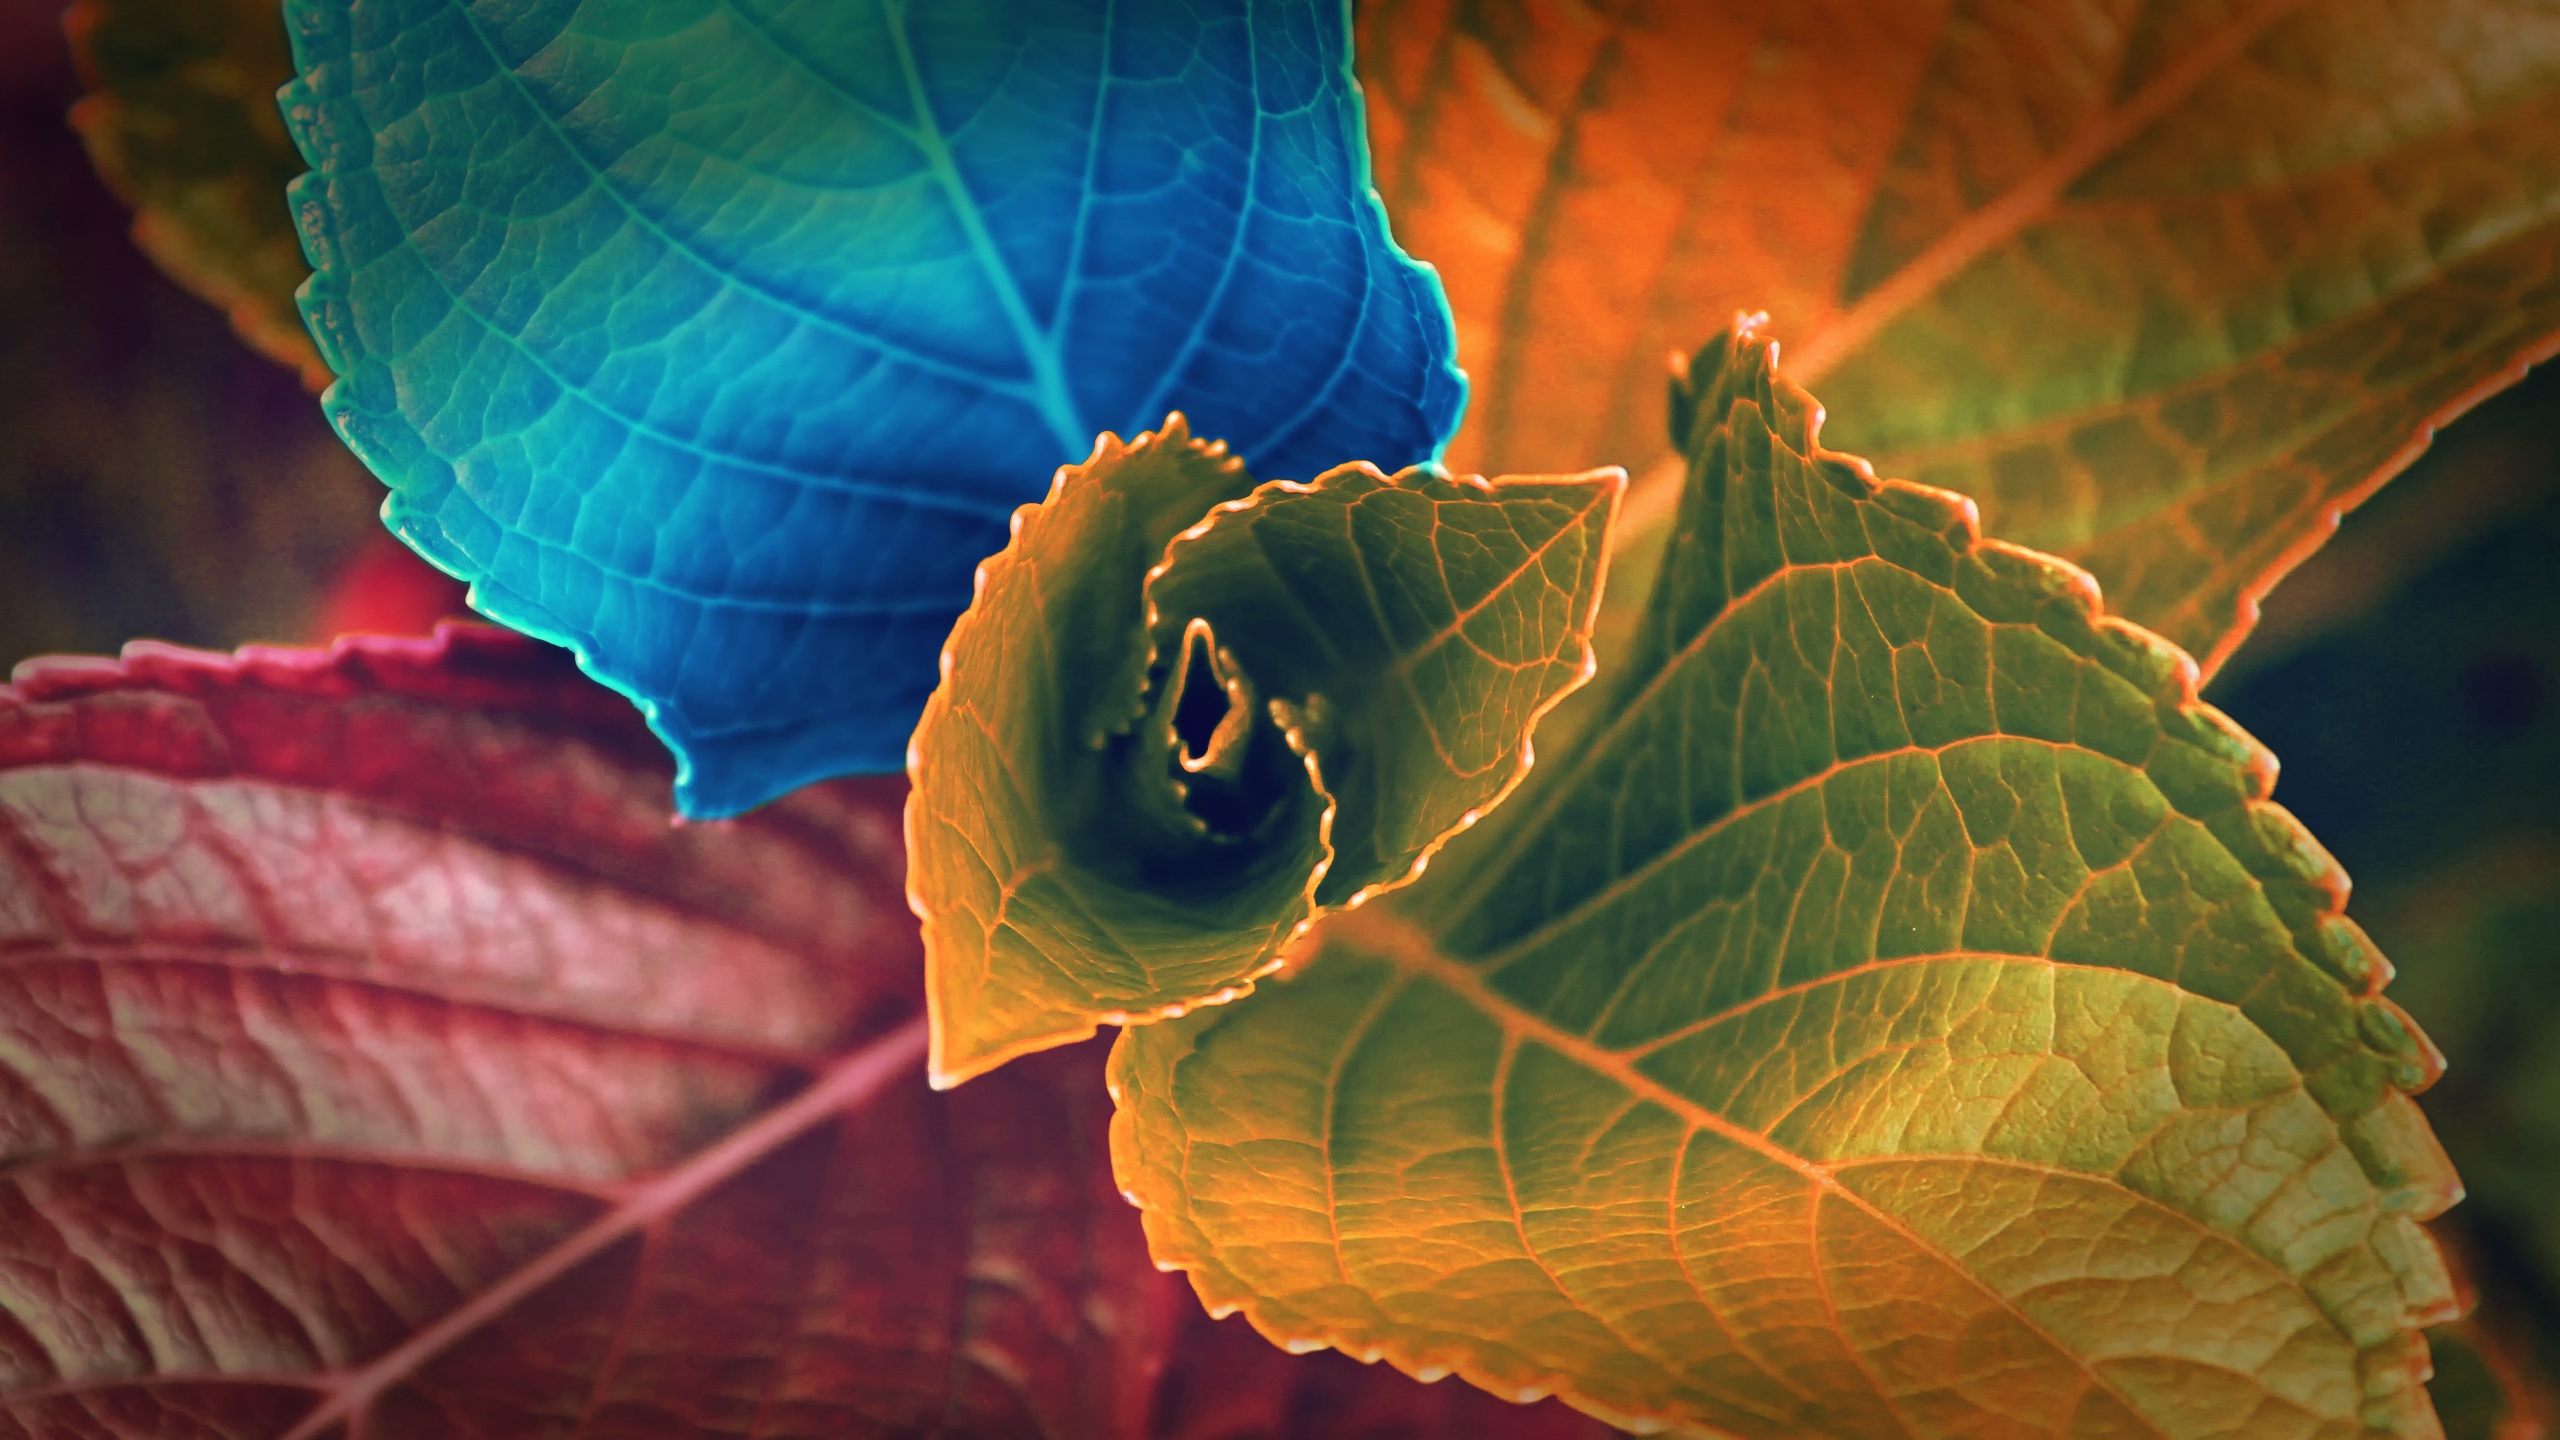 Colors of Leaves Wallpapers in jpg format for free download